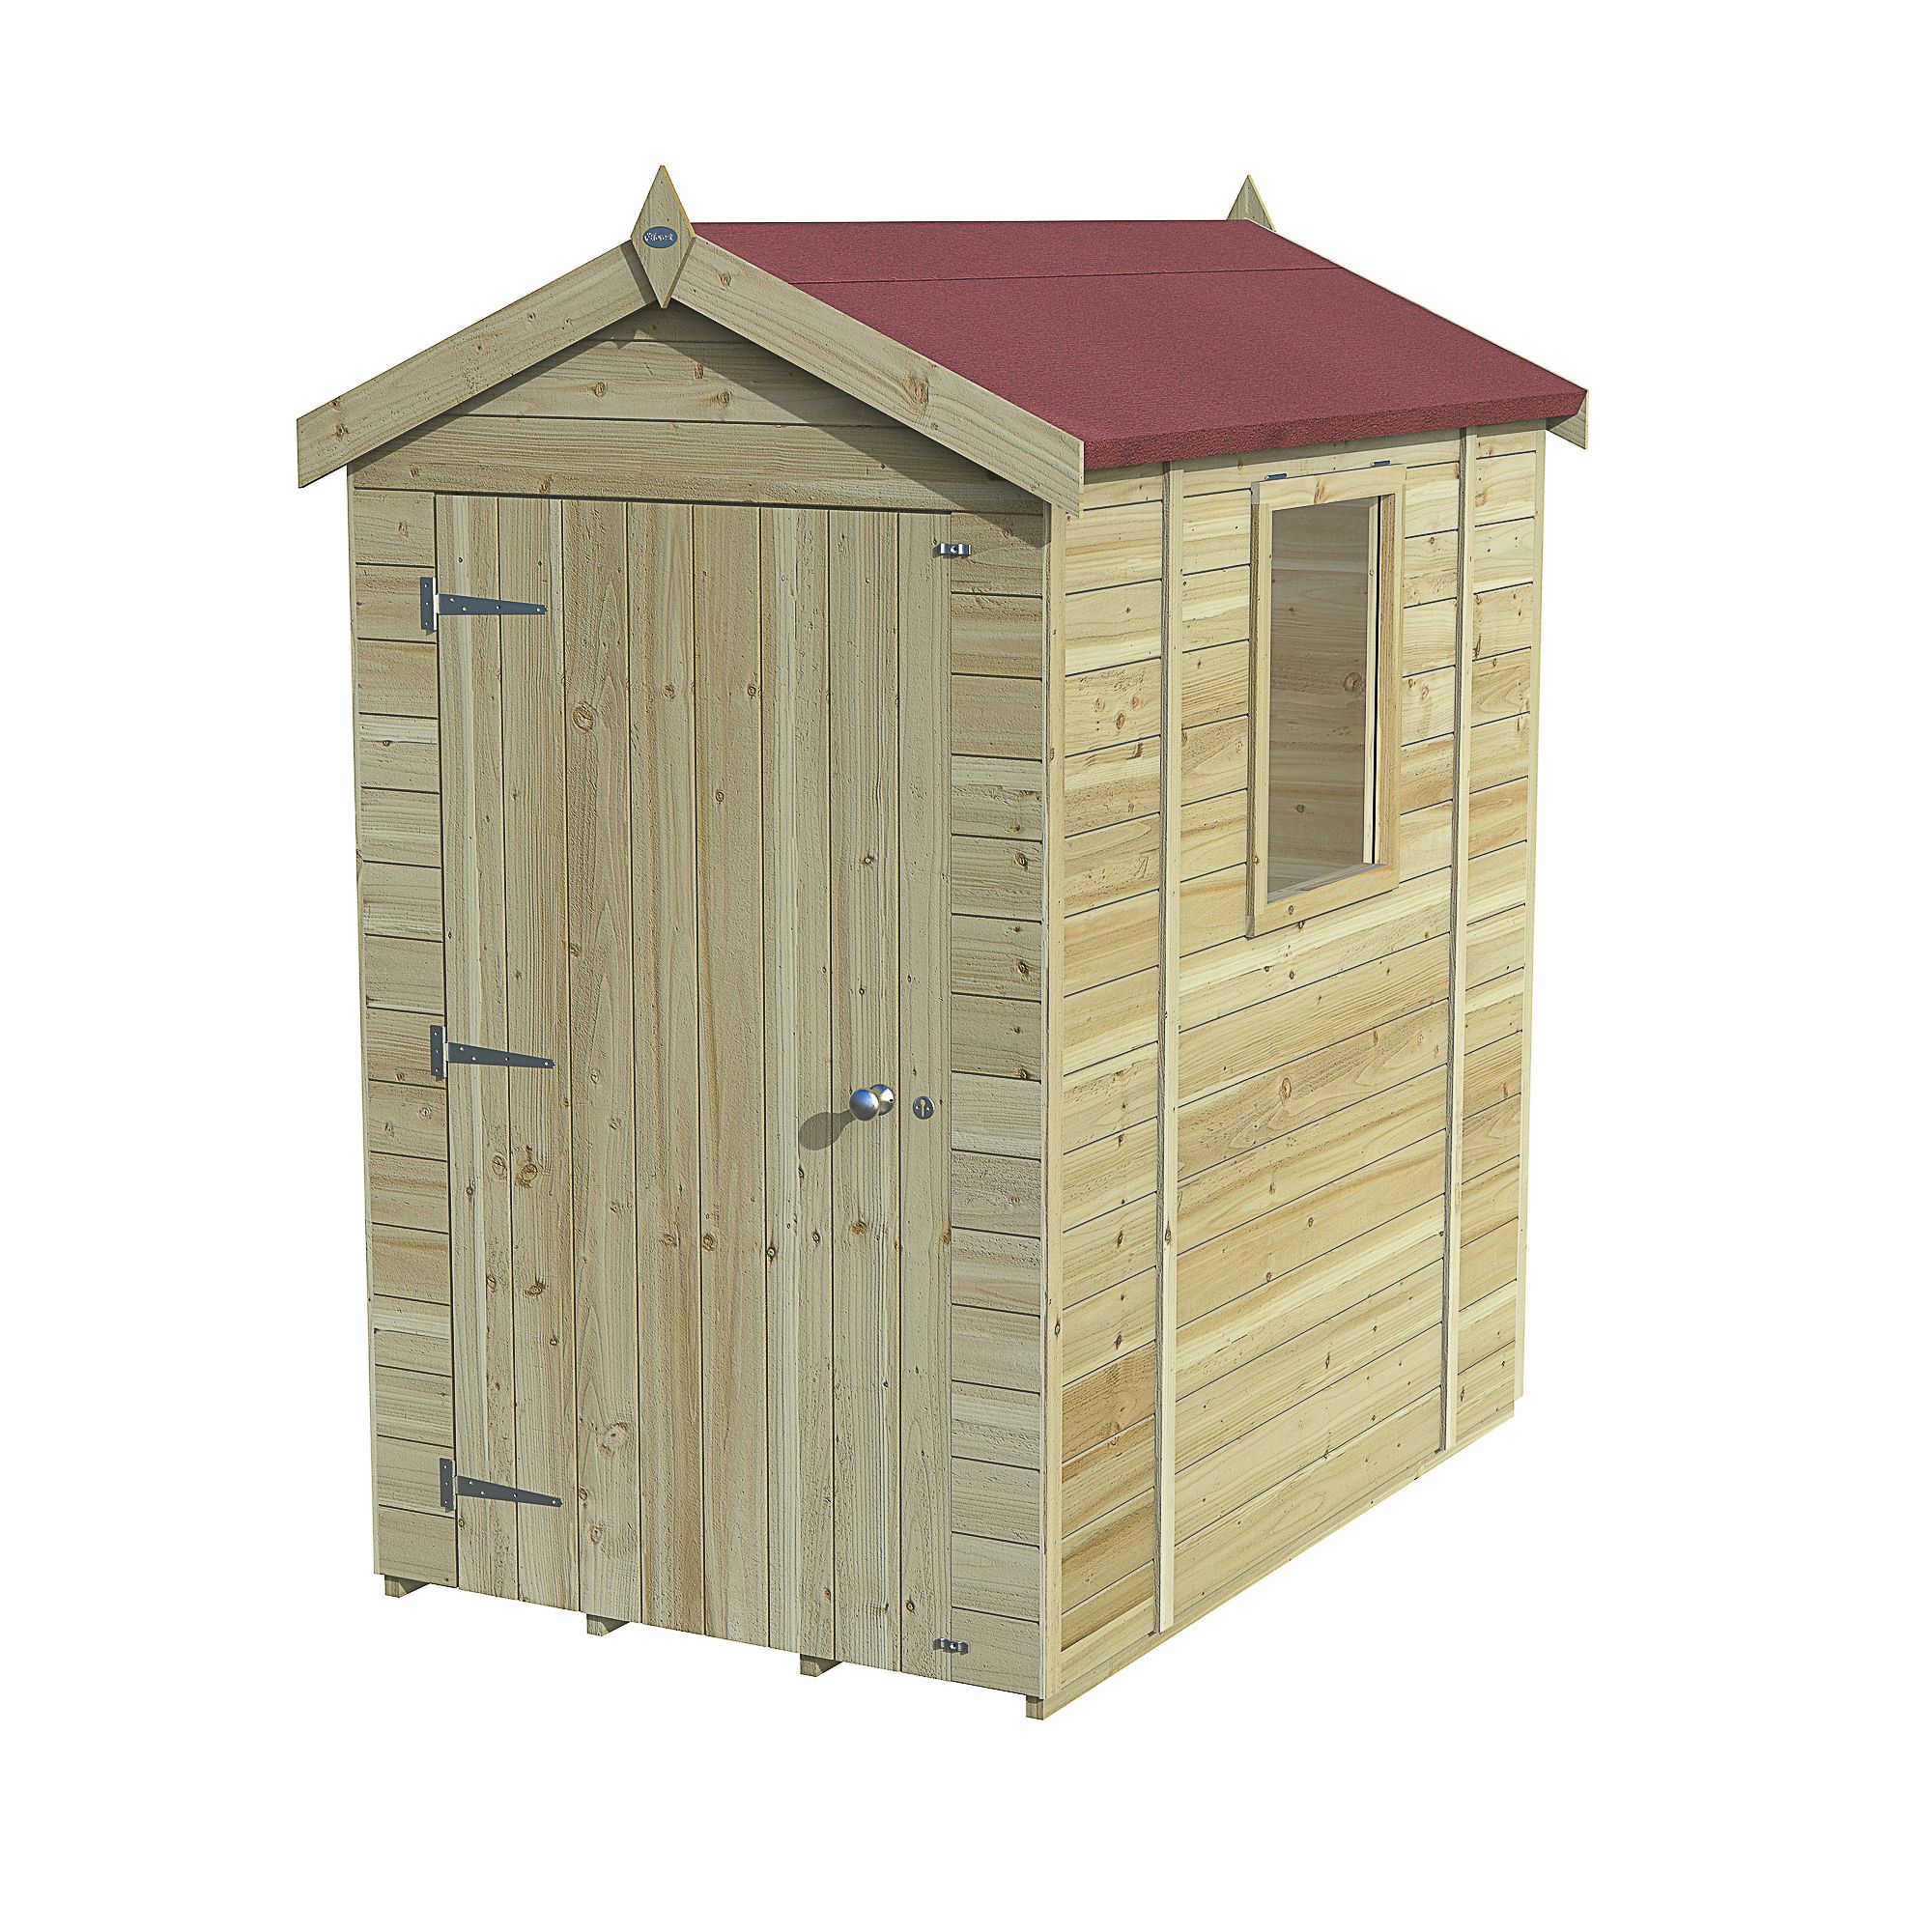 Forest Garden Timberdale 6x4 ft Apex Wooden Shed with floor